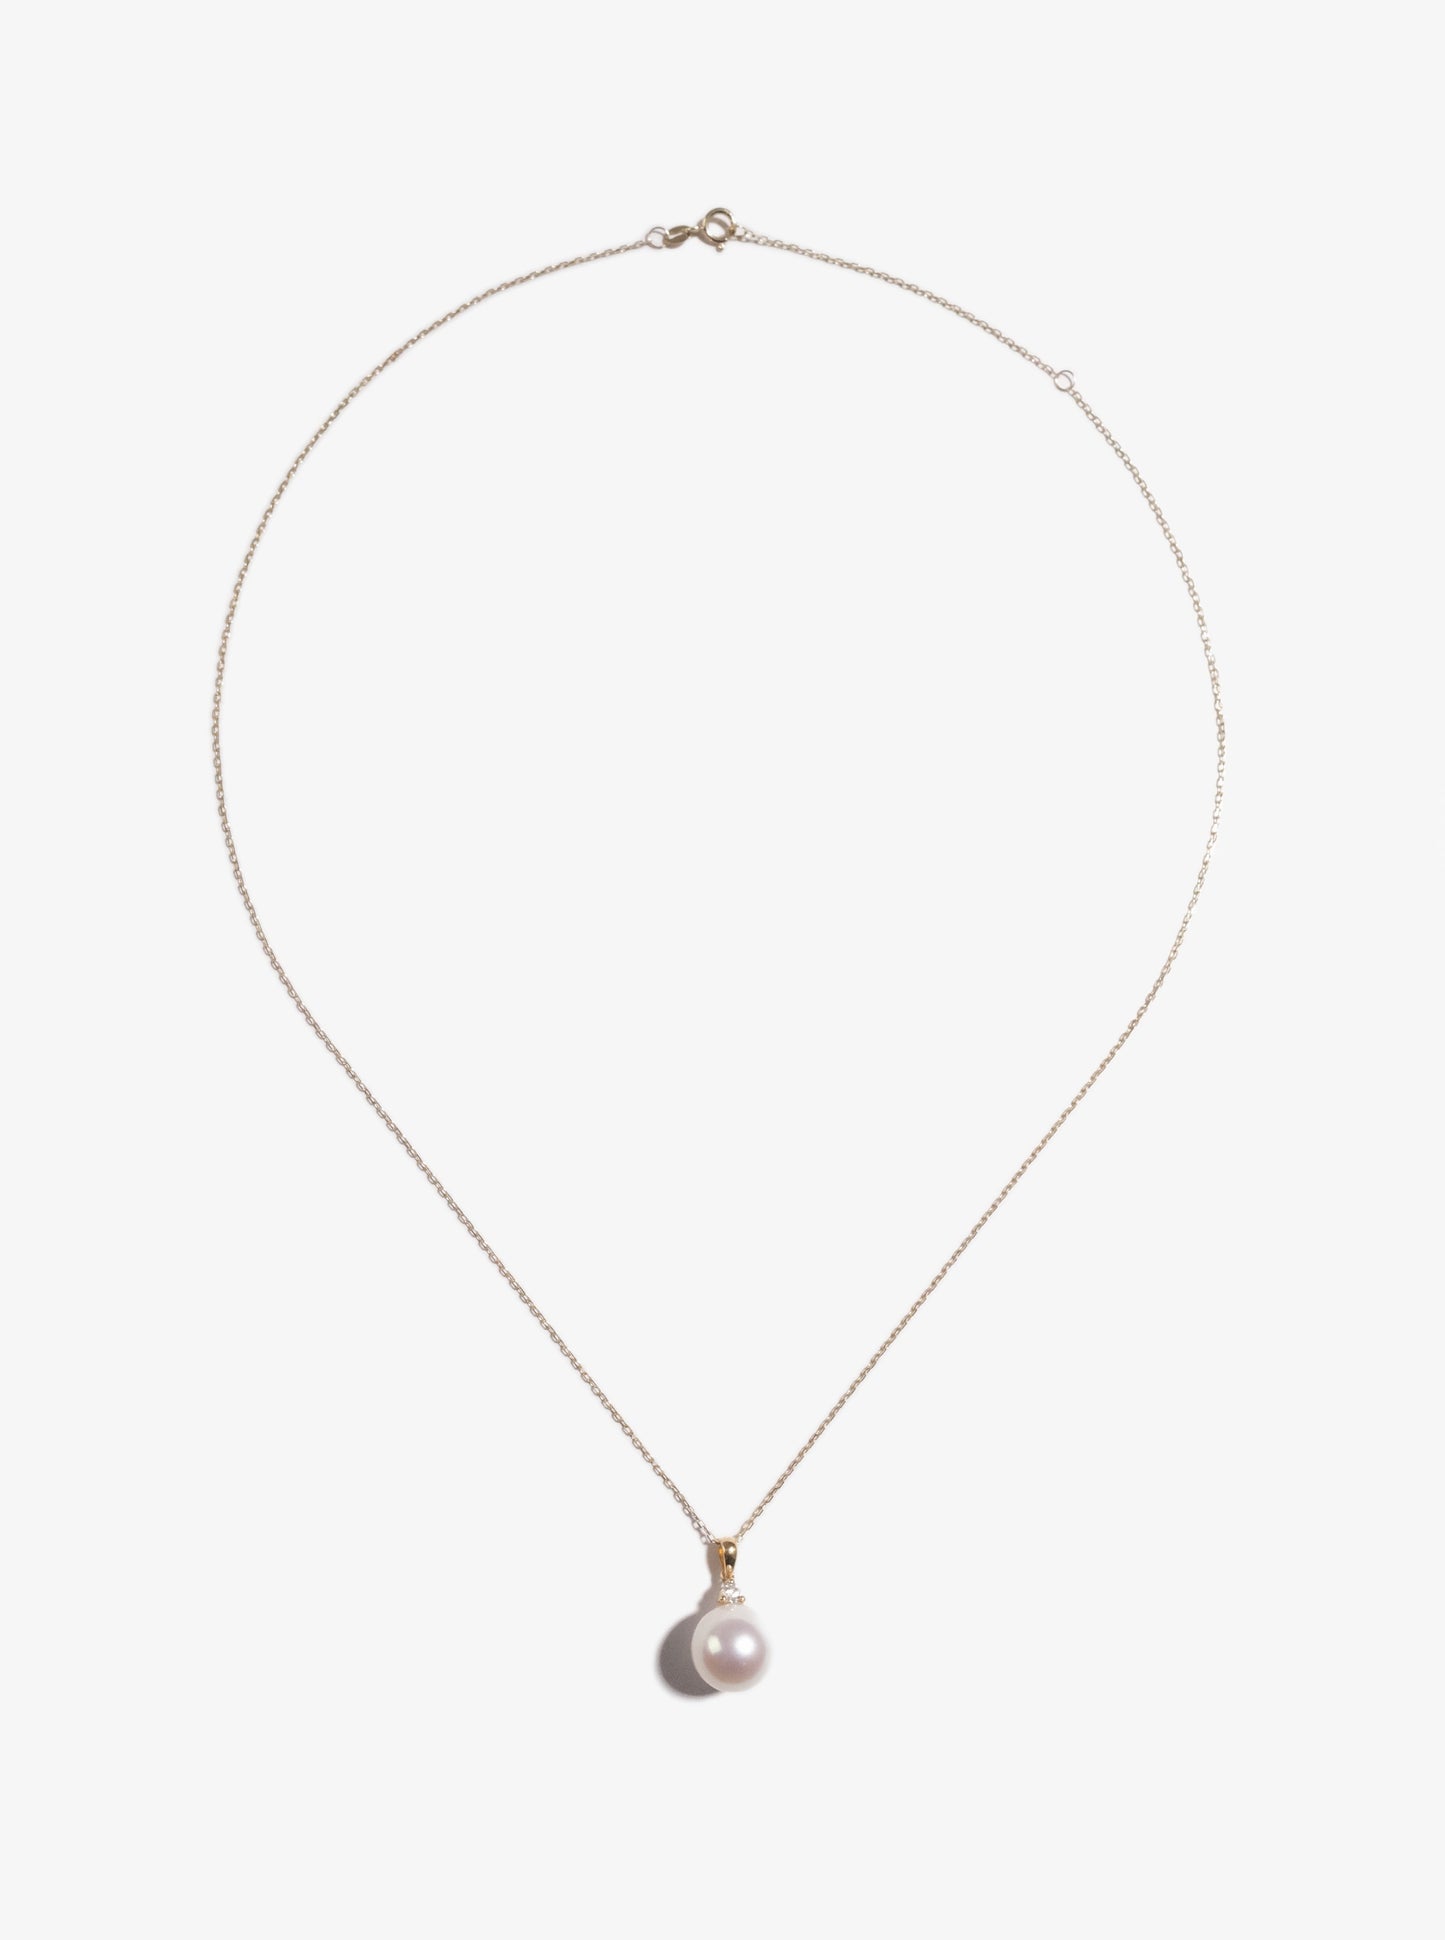 Freshwater Pearl Pendant With 18K Gold  FP18K27